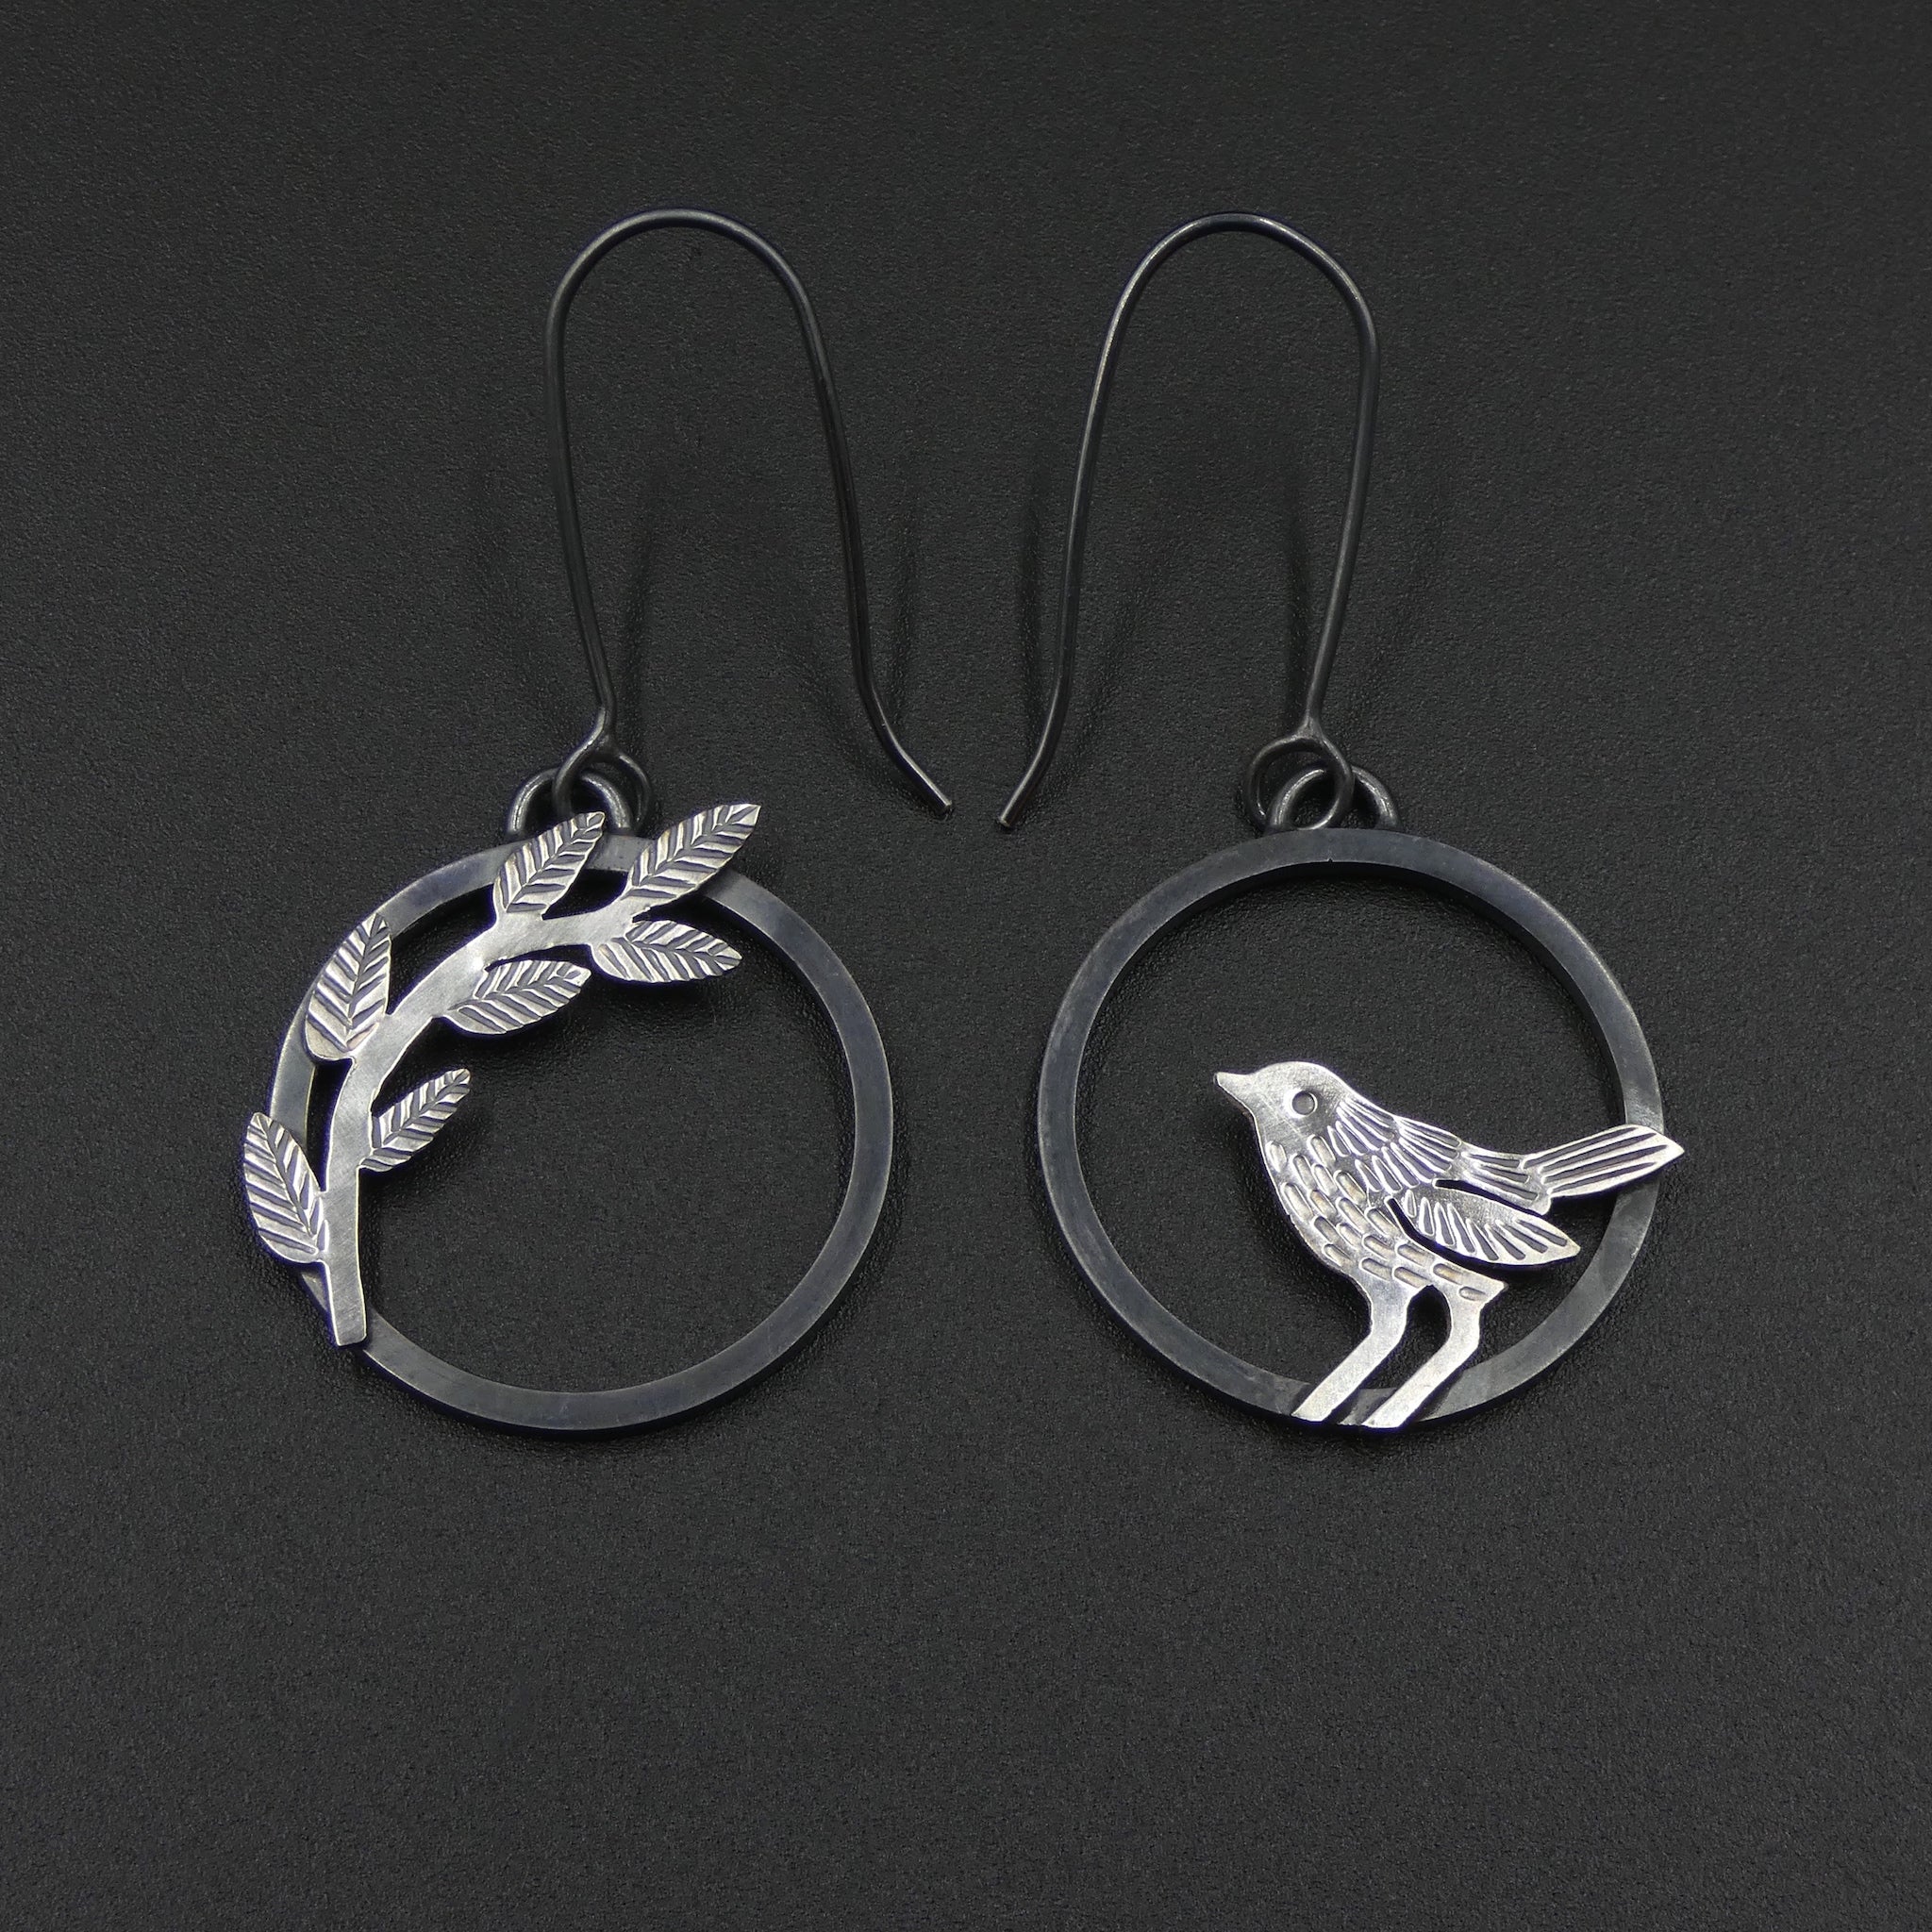 Mismatched bird and leaves earrings by jeweller Helen Shere